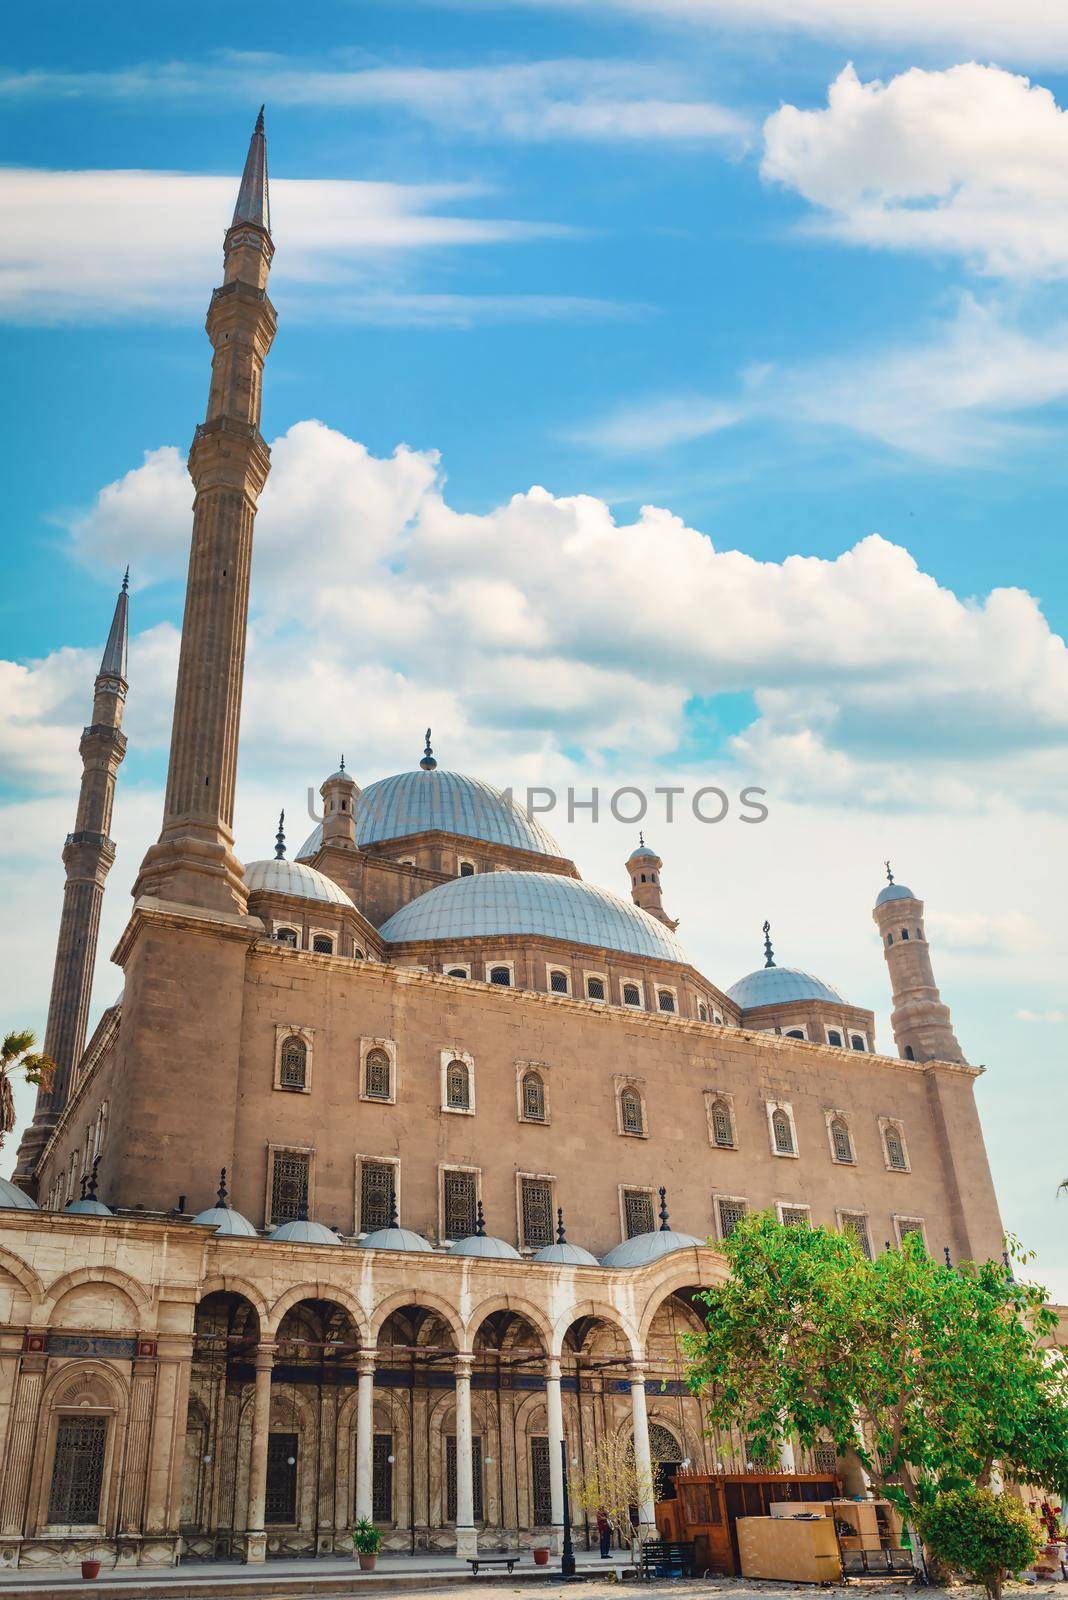 Muhammad Ali mosque by Givaga